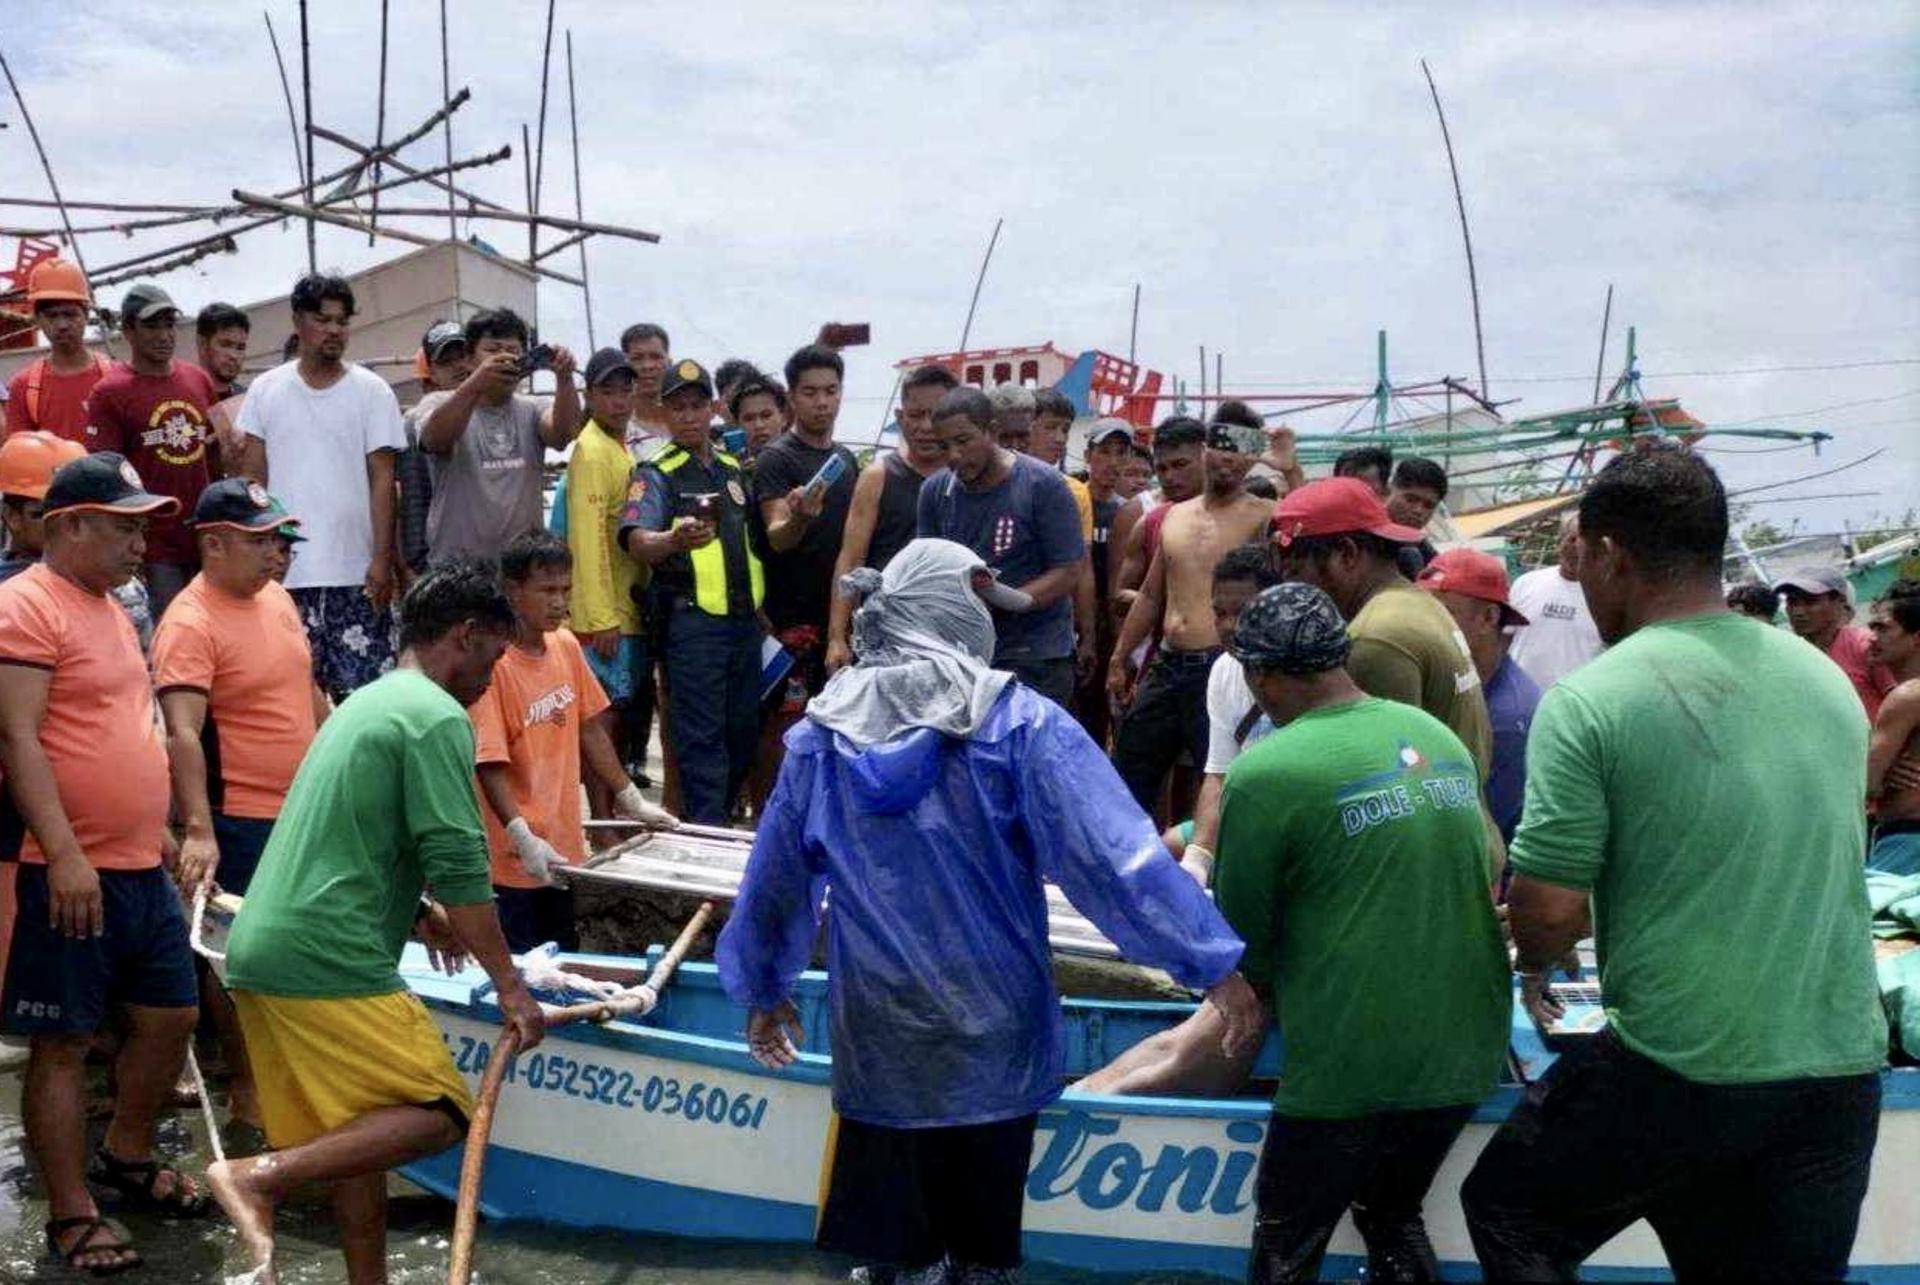 A handout picture made available by the Philippine Coast Guard (PCG) shows villagers and coast guard personnel retrieving the body of a crew member of a Filipino fishing boat in Infanta, Pangasinan province, Philippines, 03 October 2023 (issued on 04 October 2023). EFE-EPA/HO HANDOUT HANDOUT EDITORIAL USE ONLY/NO SALES